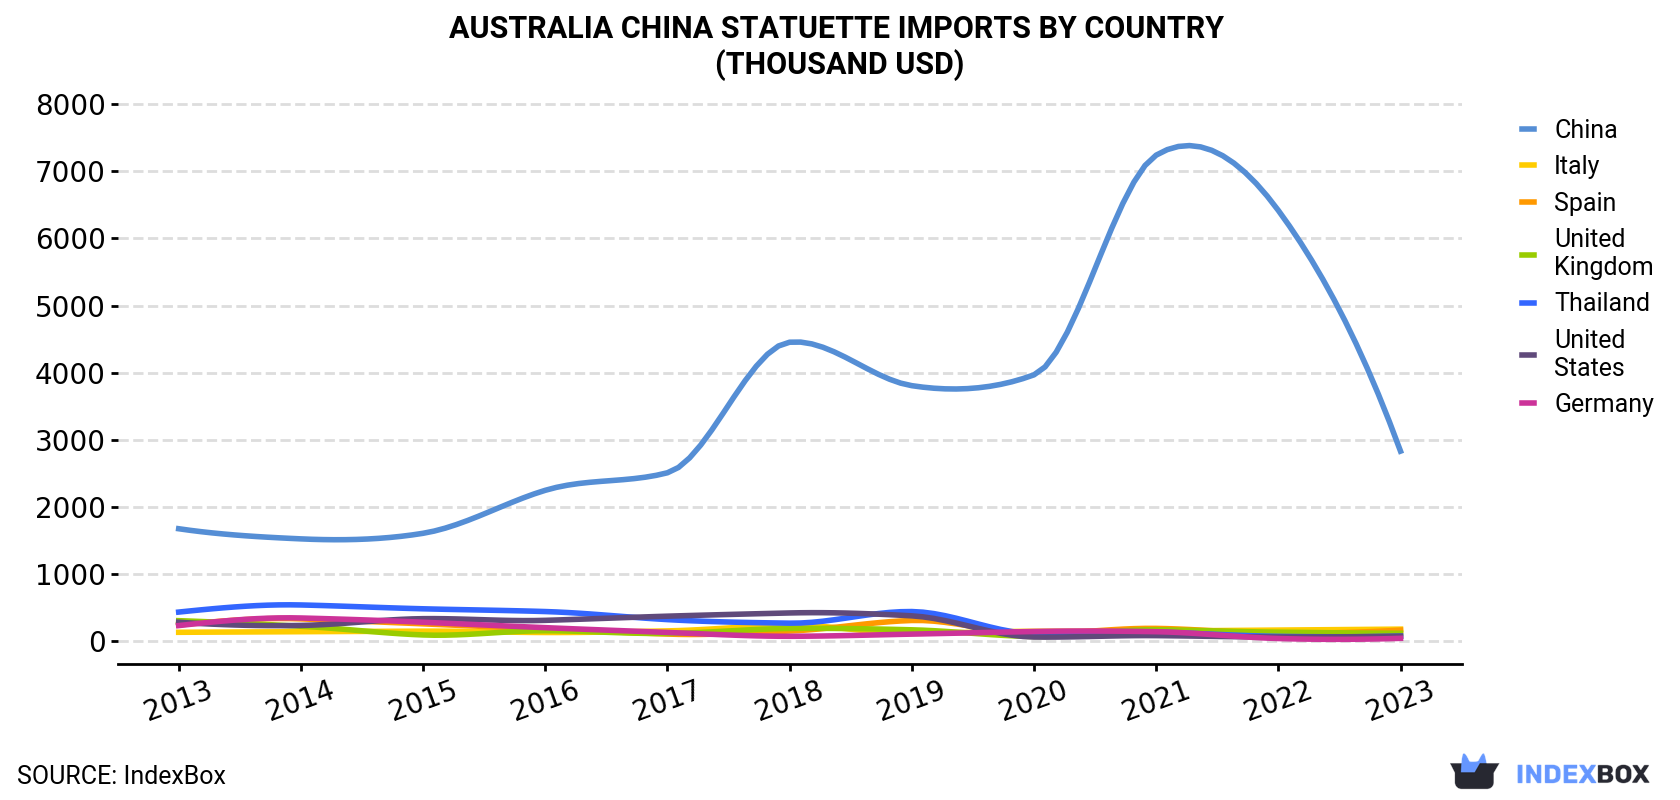 Australia China Statuette Imports By Country (Thousand USD)